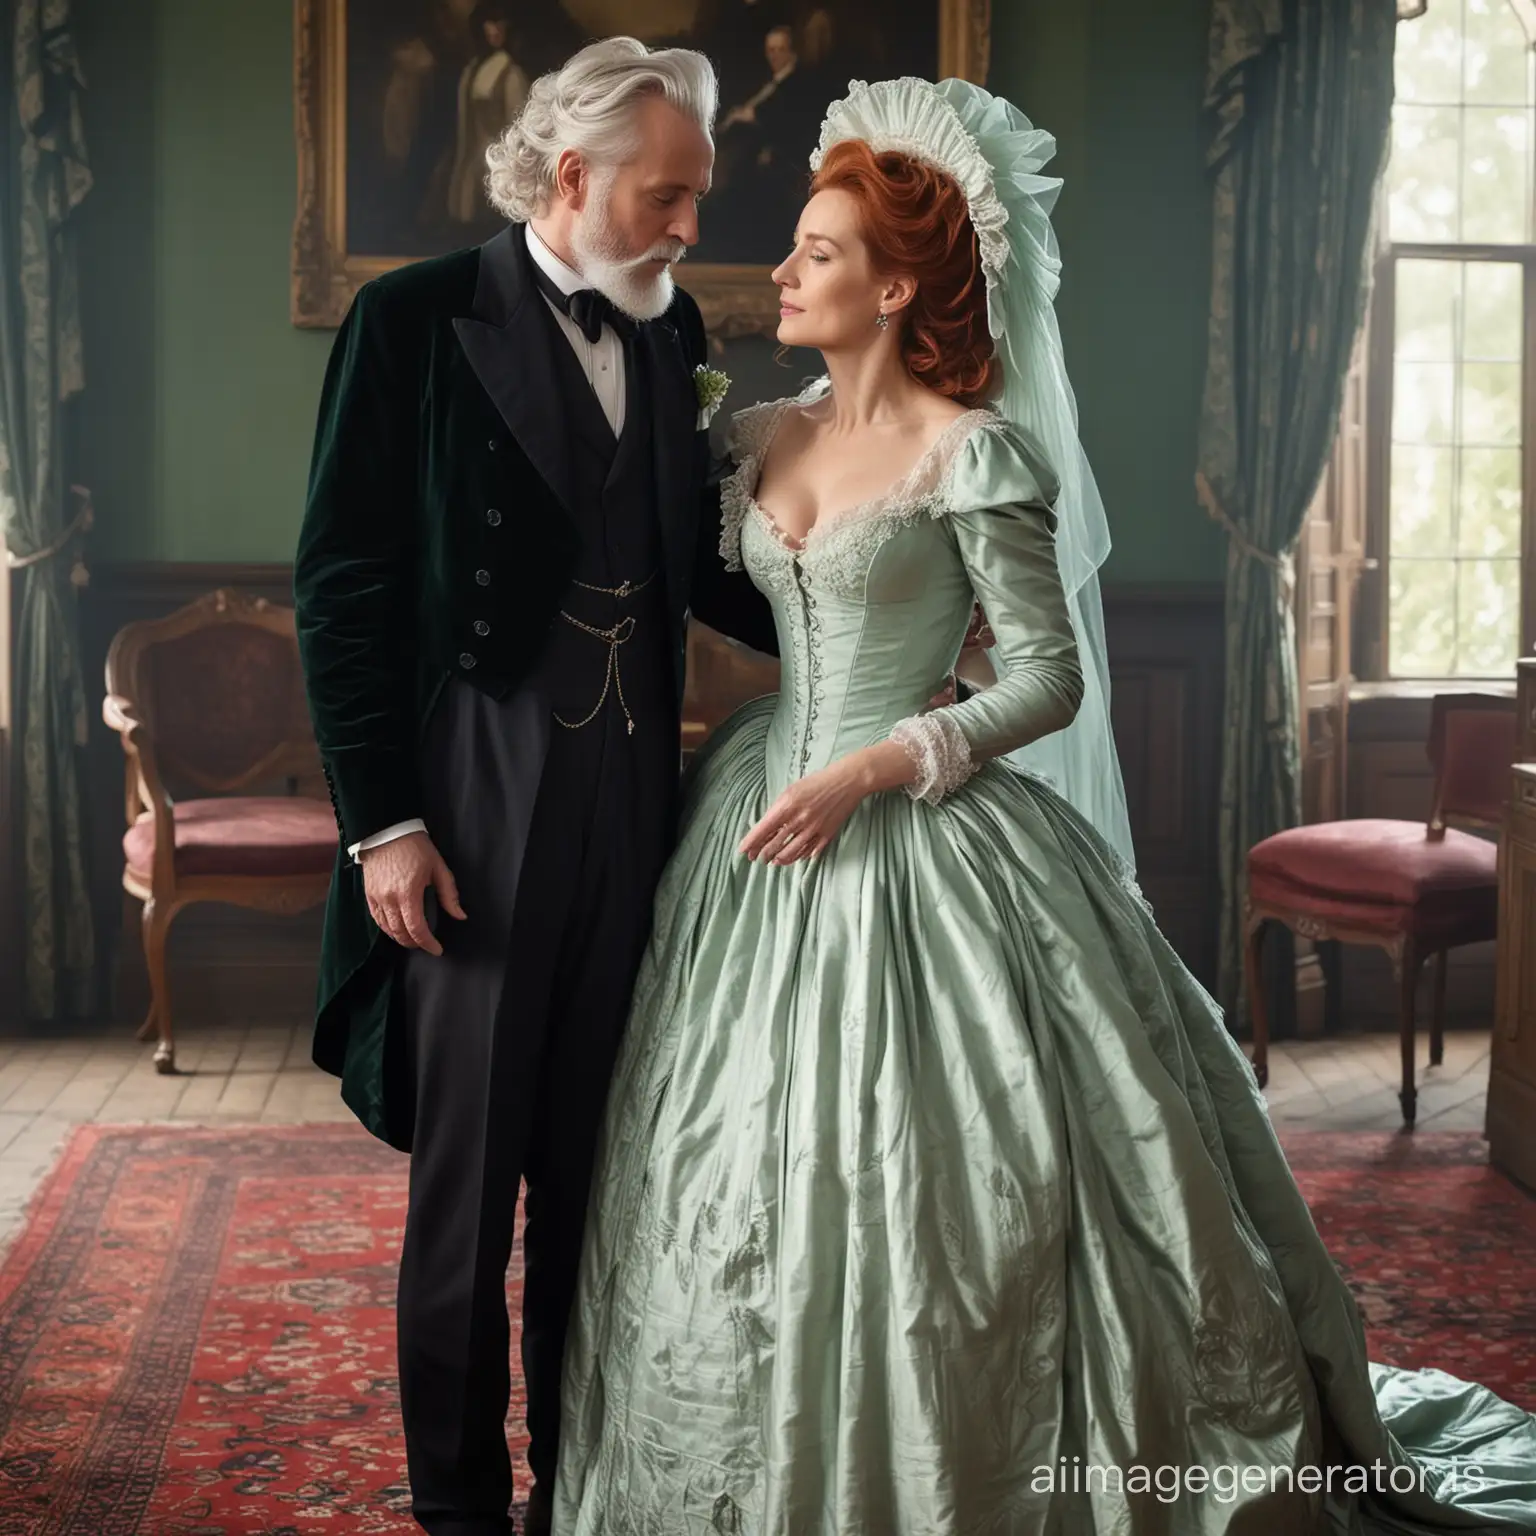 red hair Gillian Anderson wearing a poofy dark emerald floor-length loose billowing 1860 victorian crinoline dress with  a frilly bonnet kissing an old man dressed in victorian black suit who seems to be her newlywed husband